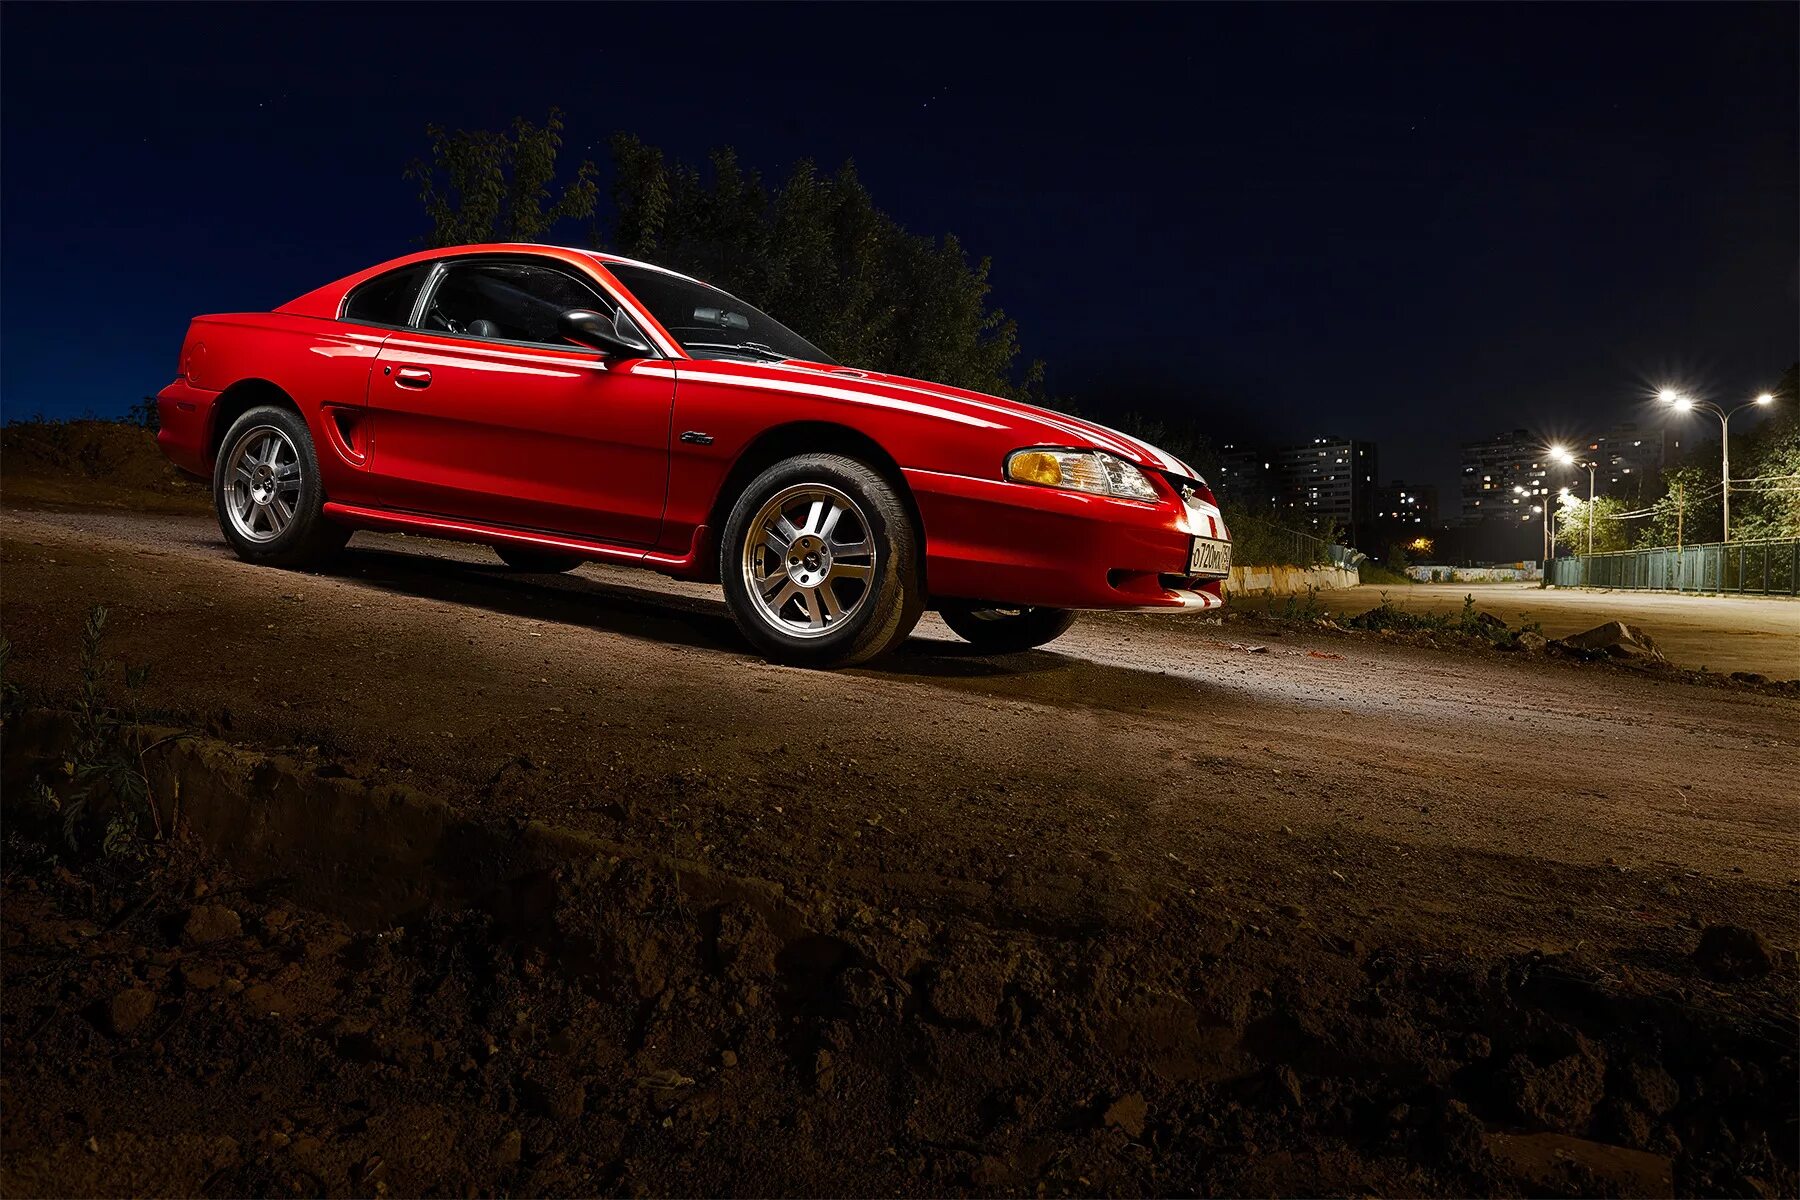 Форд Мустанг 4. Форд Мустанг 95. Ford Mustang sn95 gt. Ford Mustang sn95 rest. Расход форд мустанг